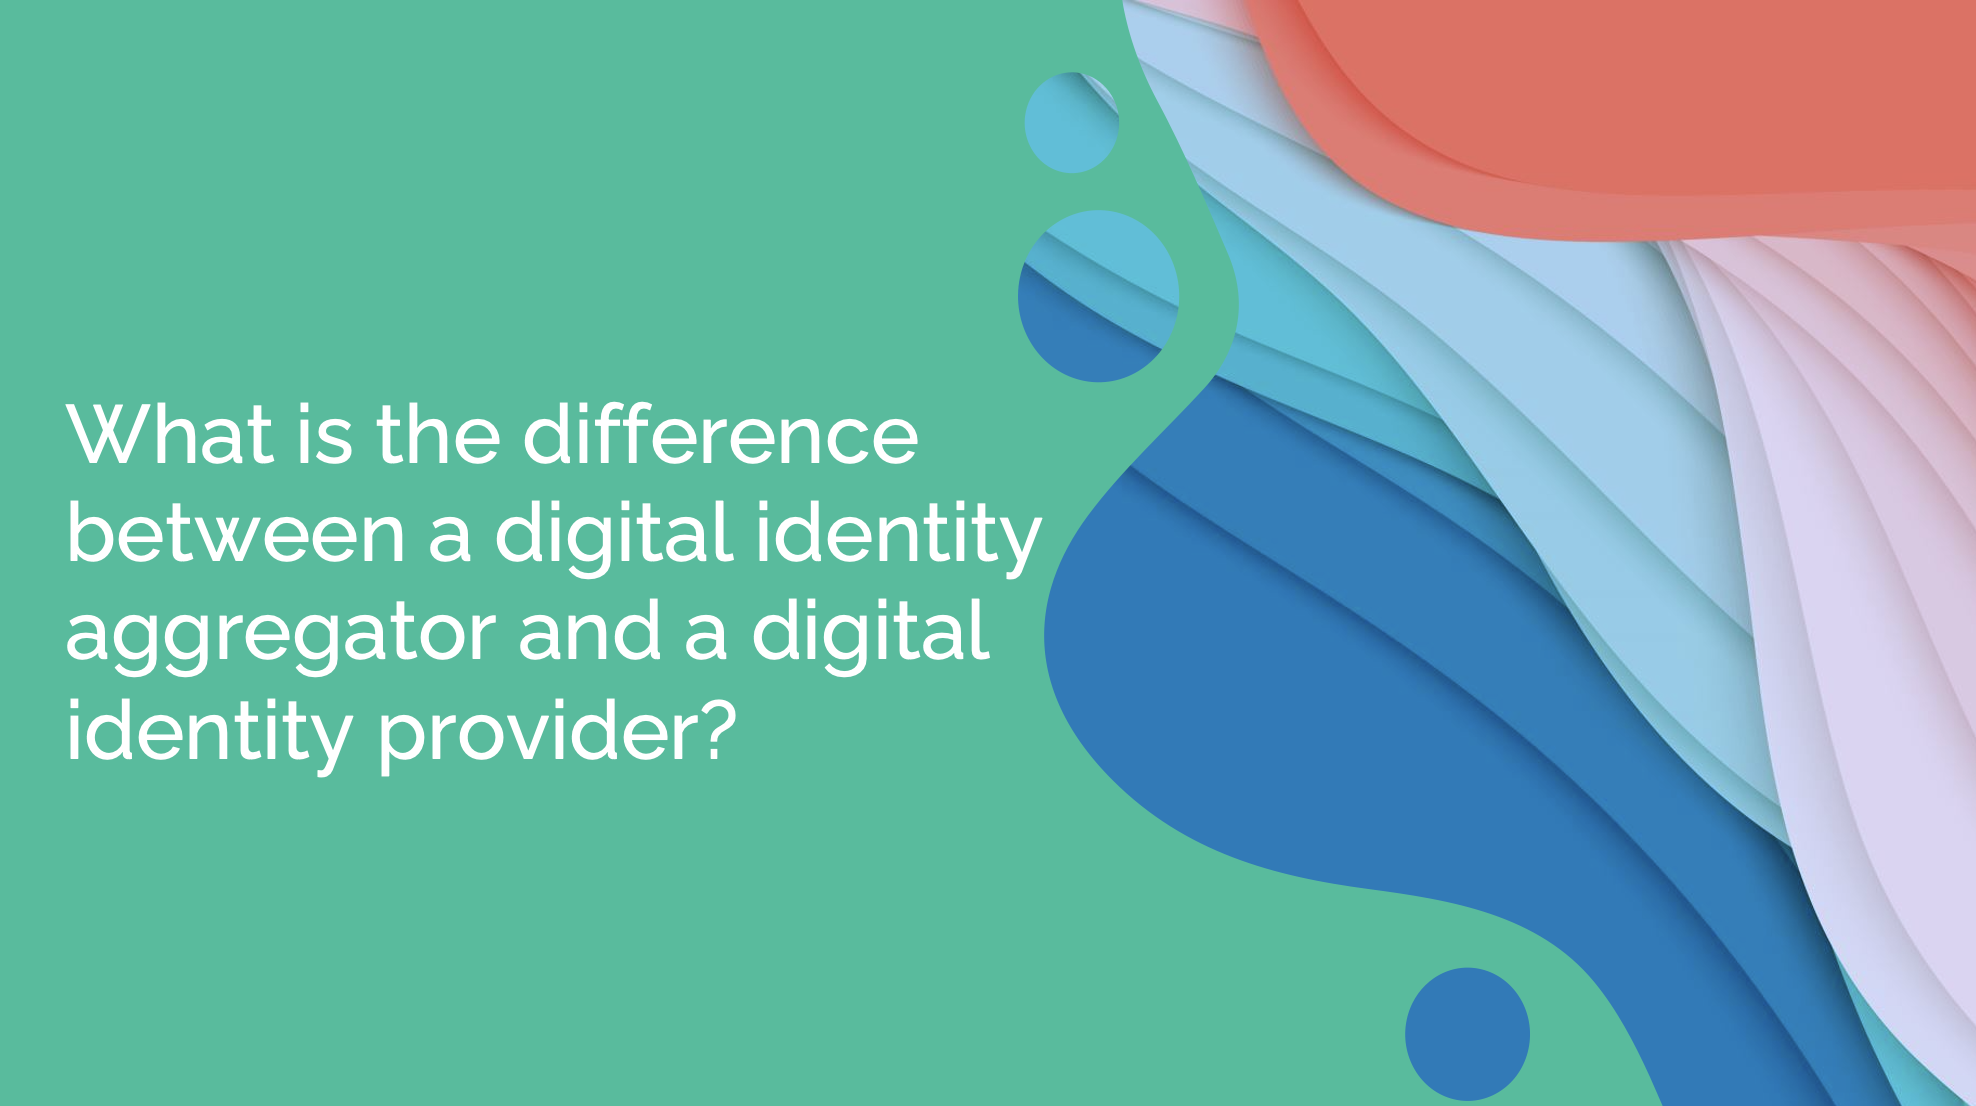 What is the difference between a Digital identity aggregator and a digital identity provider?